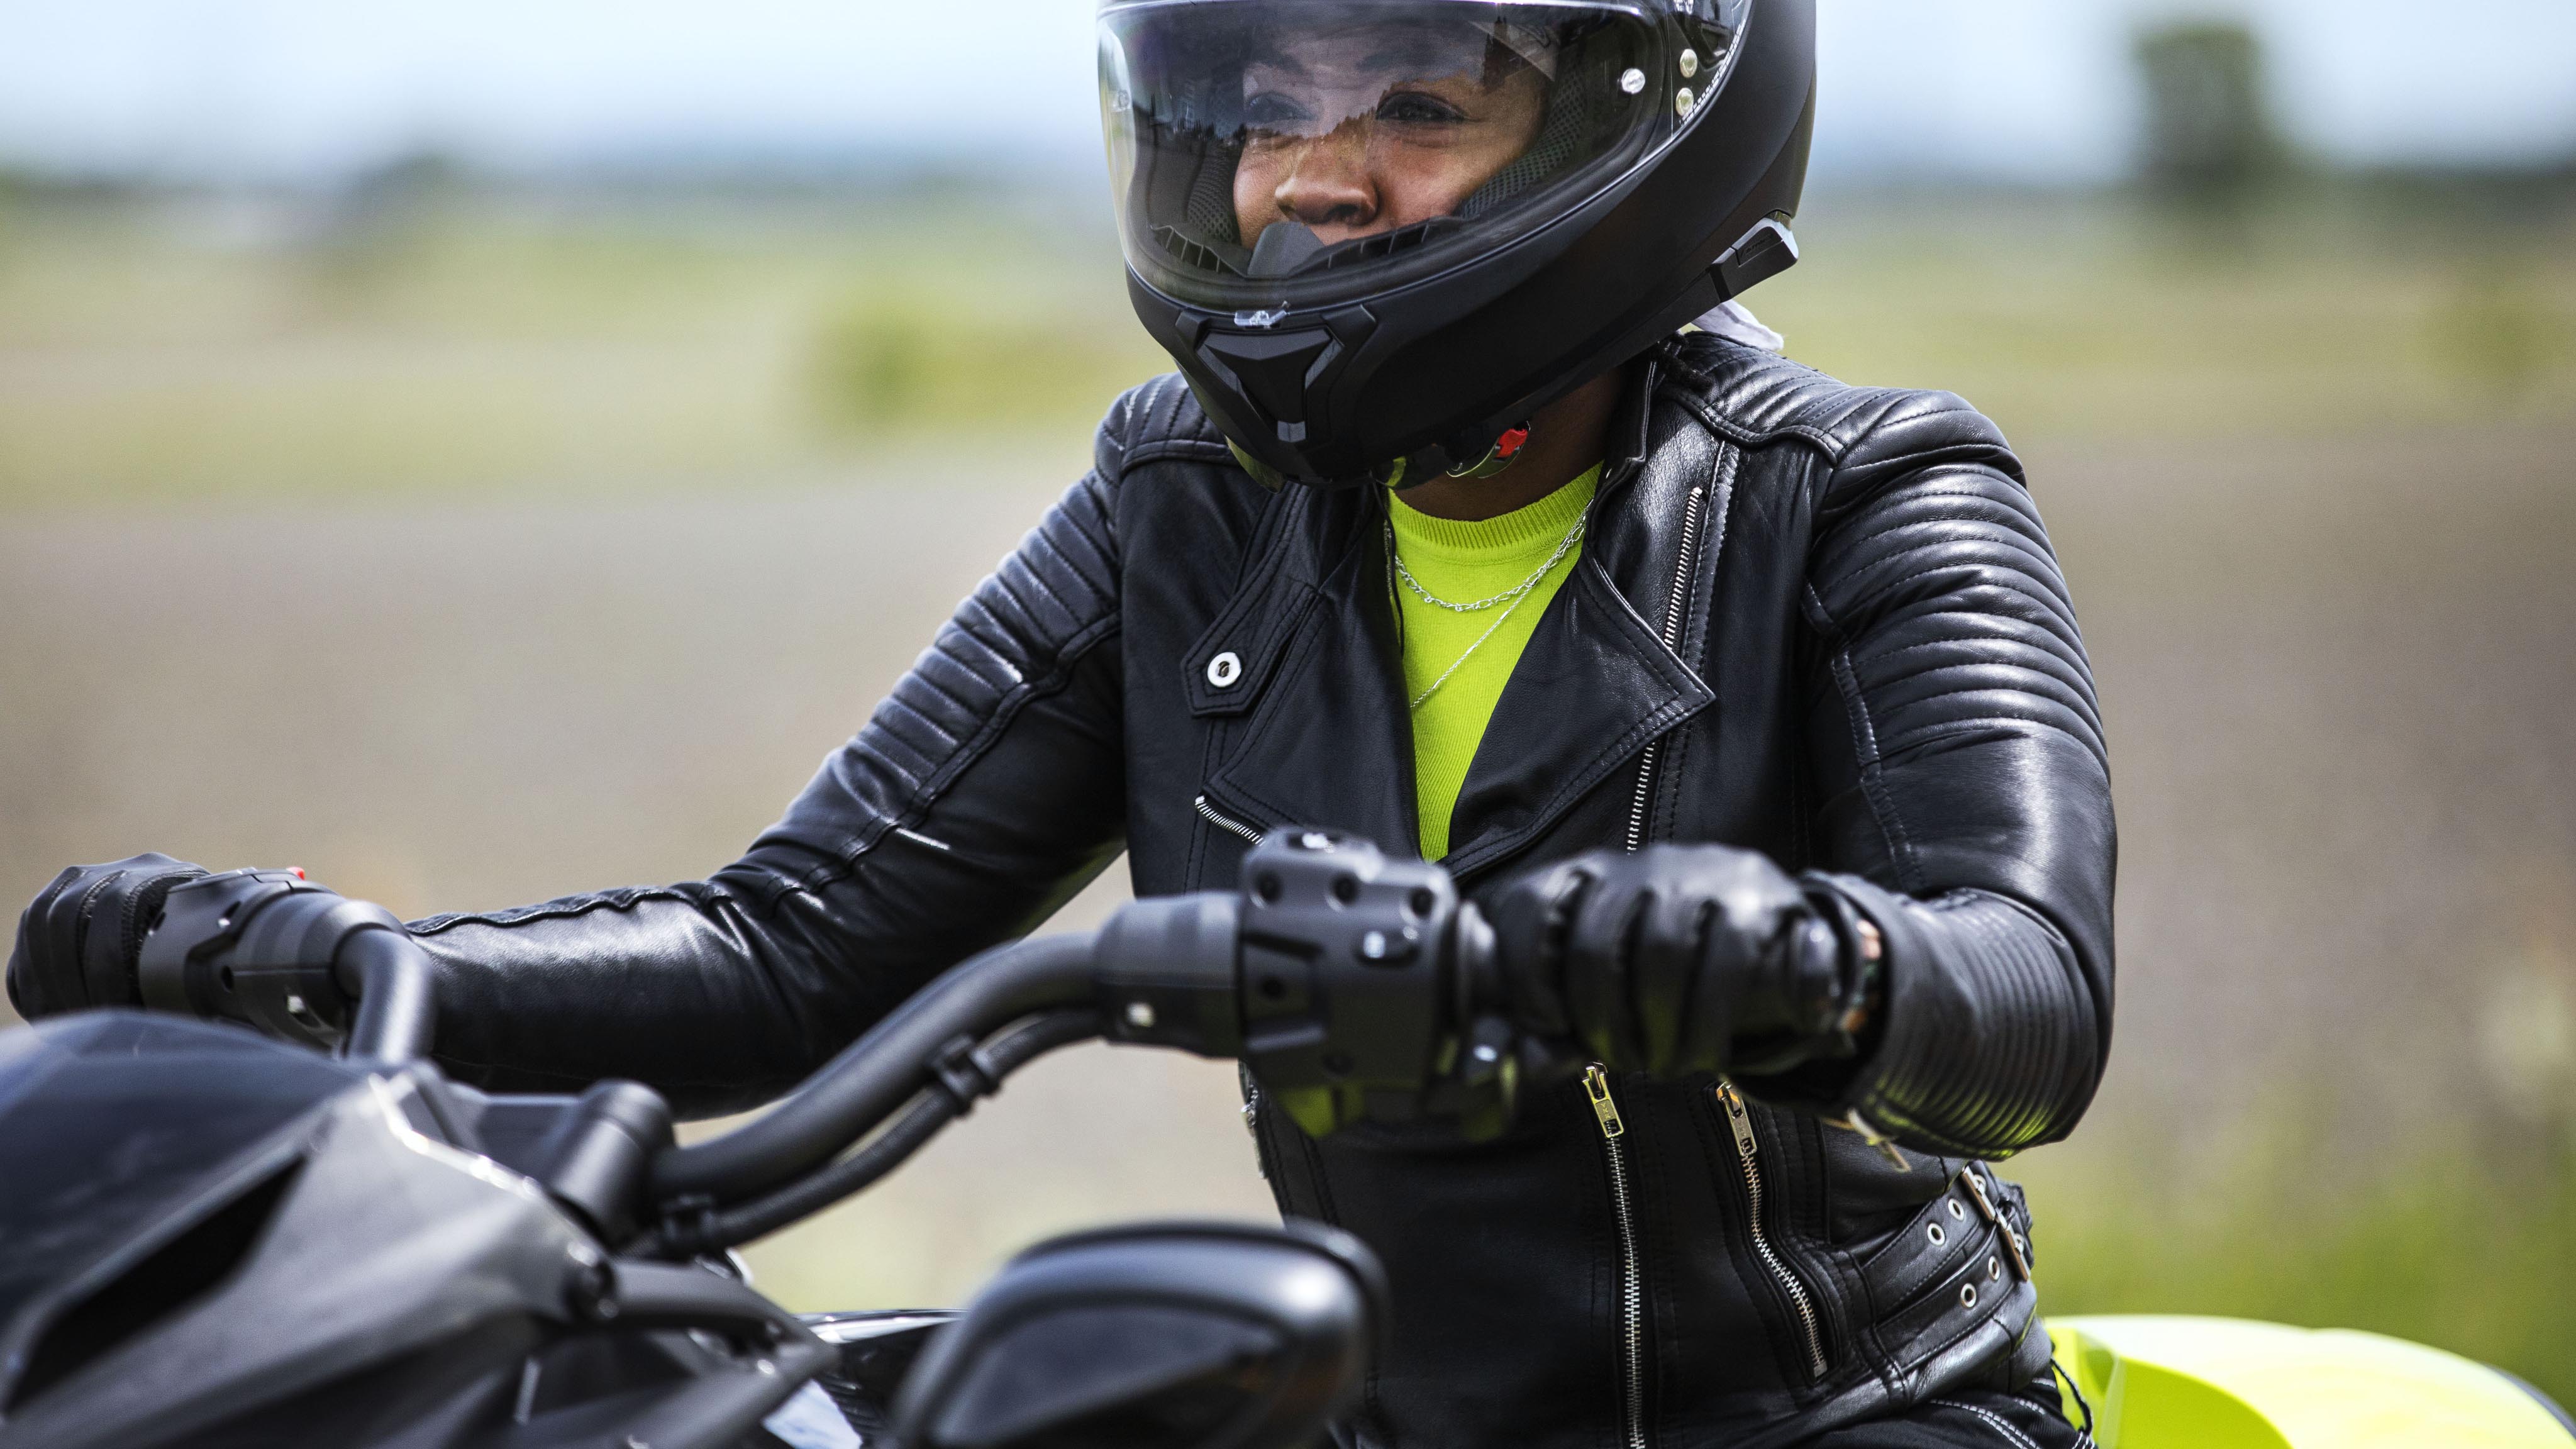 Woman with riding gear on her Can-Am Rider 